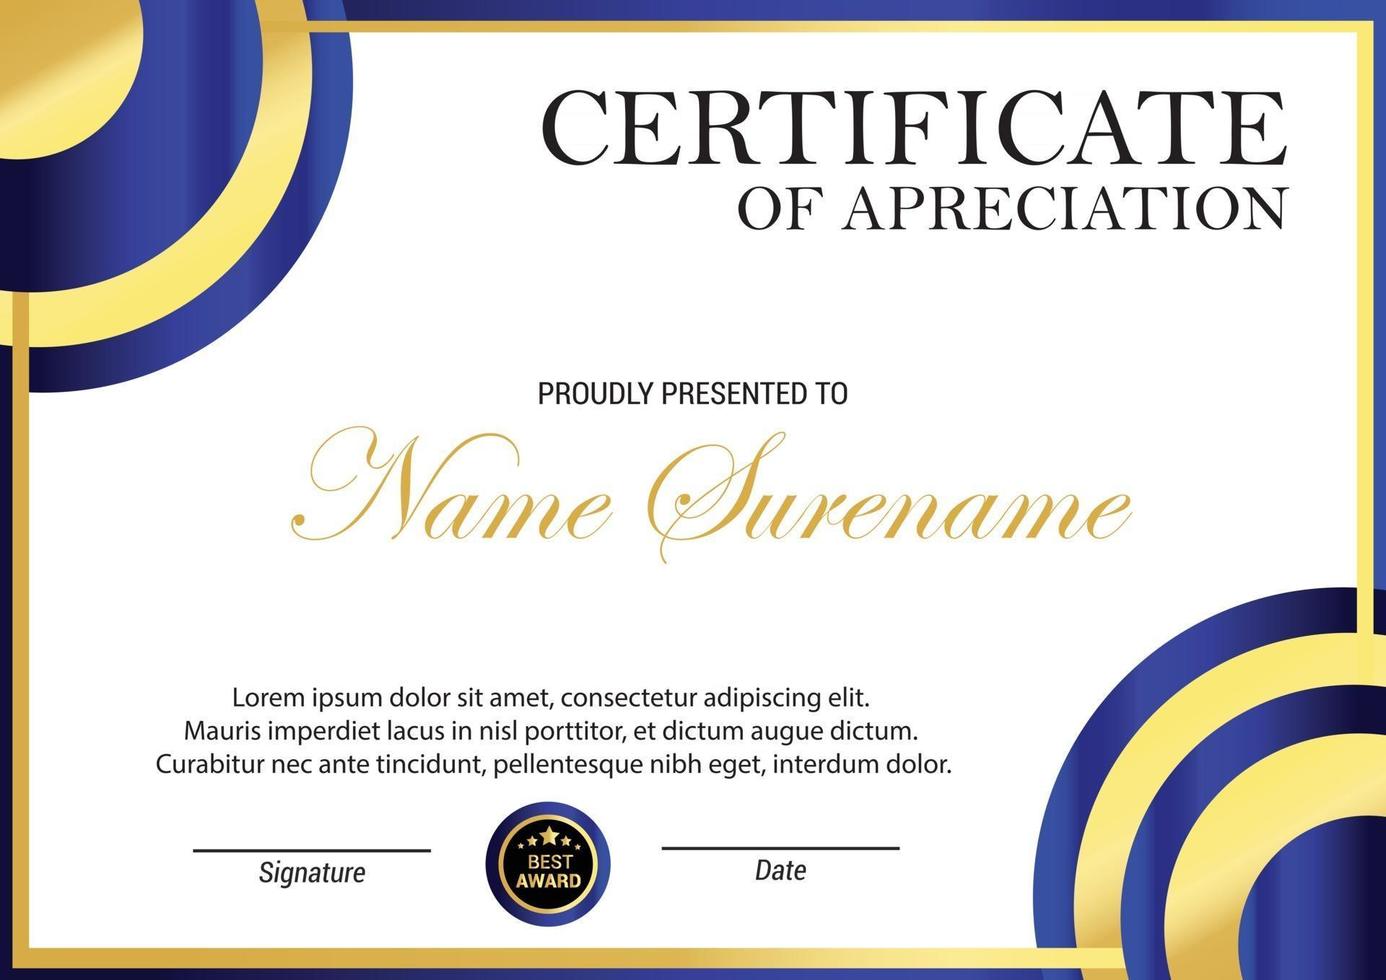 Professional diploma award apreciation certificate template in gold blue style vector